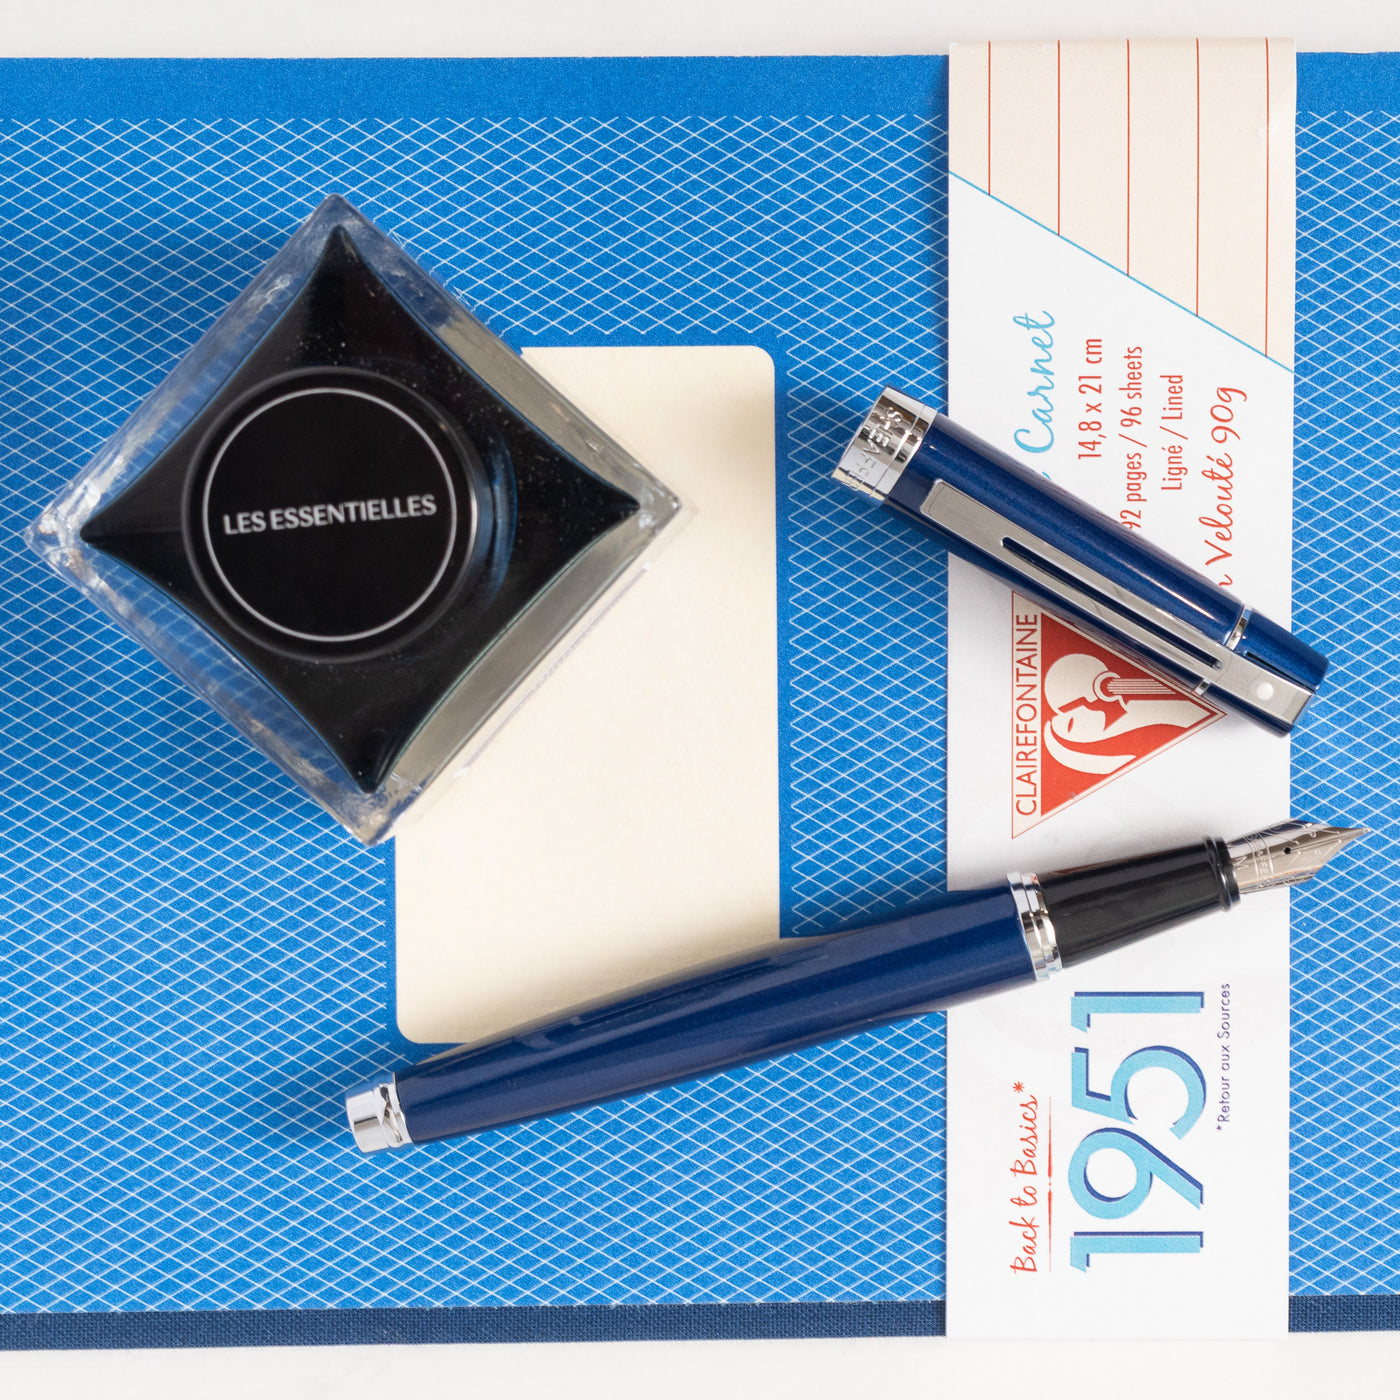  Sheaffer 300 Fountain Pen - Glossy Blue with Chrome Cap metal